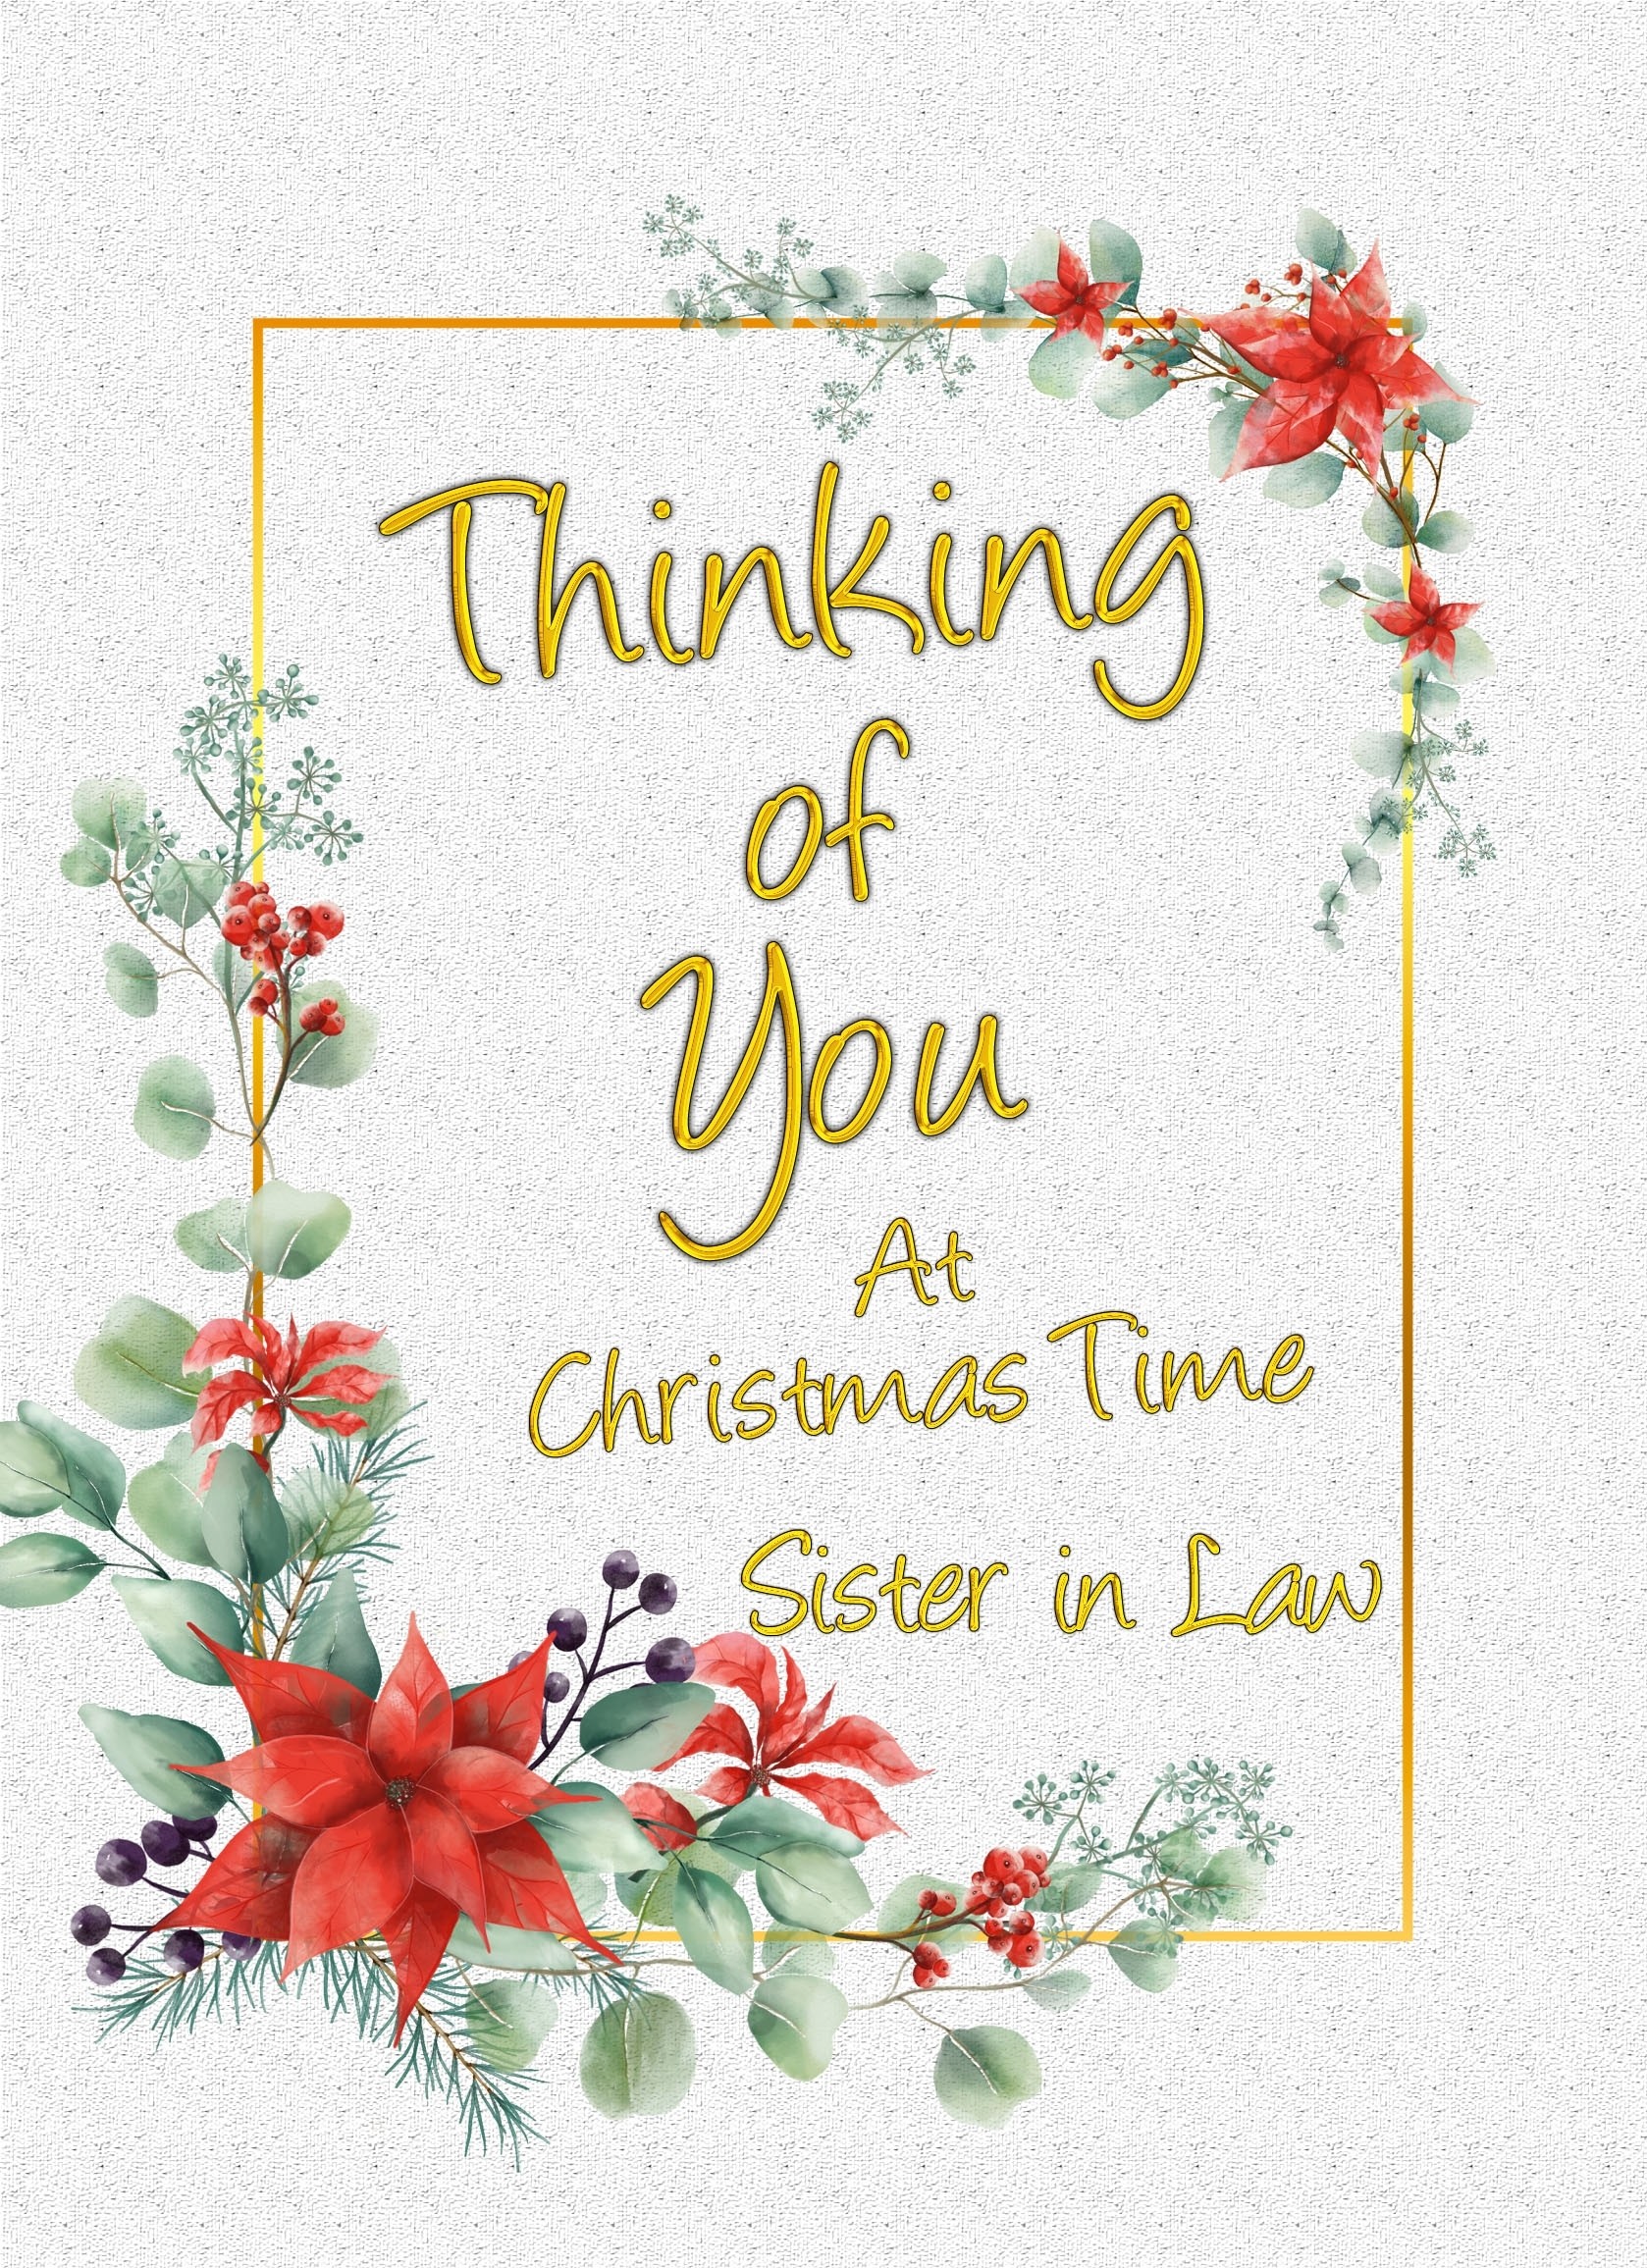 Thinking of You at Christmas Card For Sister in Law